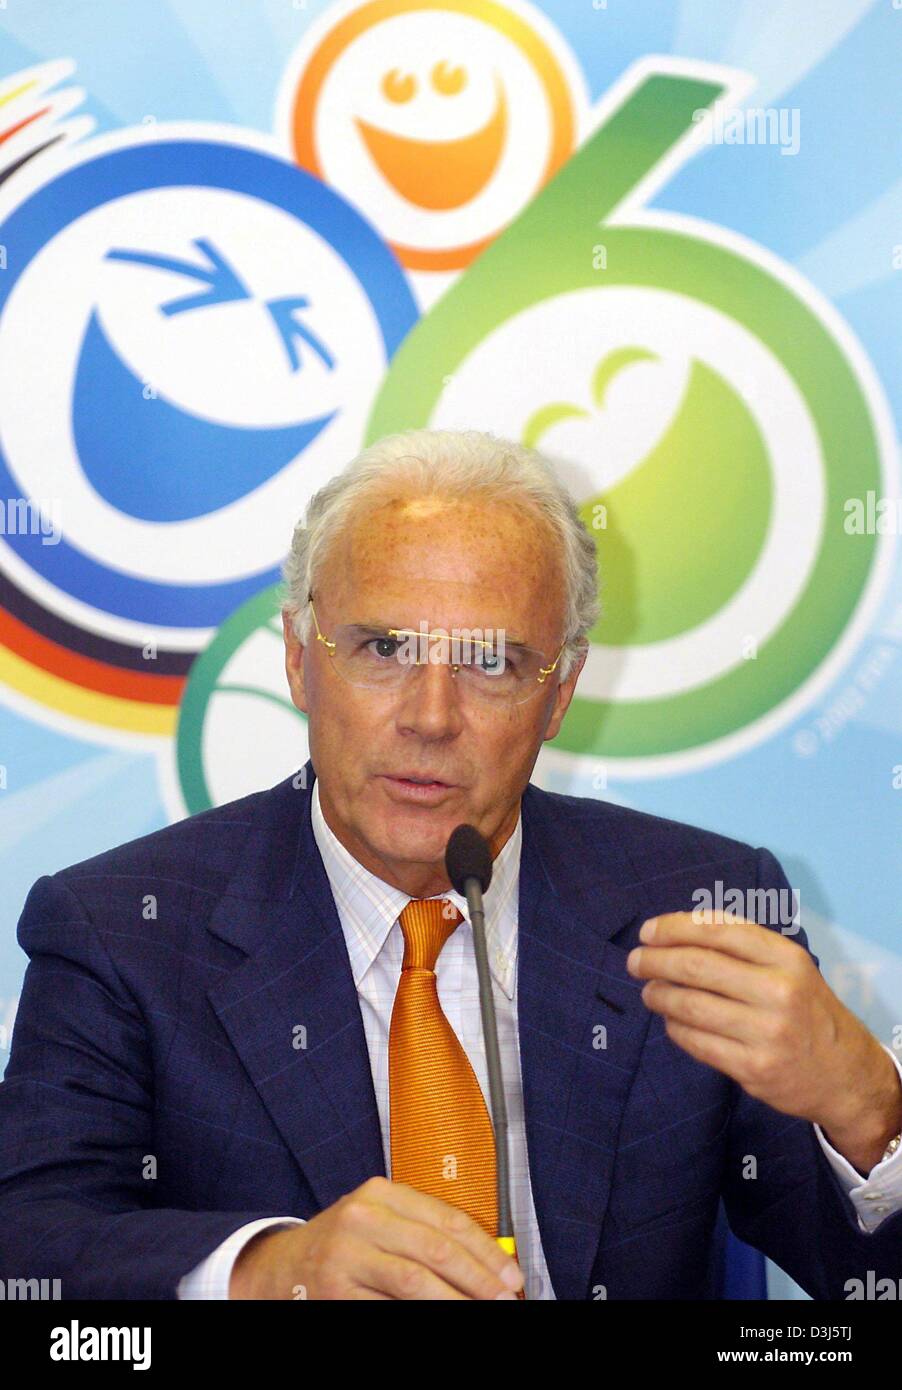 (dpa) - Former soccer star Franz Beckenbauer from Germany speaks as President of the organizing committee about the next soccer FIFA World Cup to be held in Germany in 2006, in Basel, Switzerland, 2 June 2004, prior to a pre Euro2004 friendly match between Germany and Switzerland. In the background the logo for the 2006 World Cup. Stock Photo